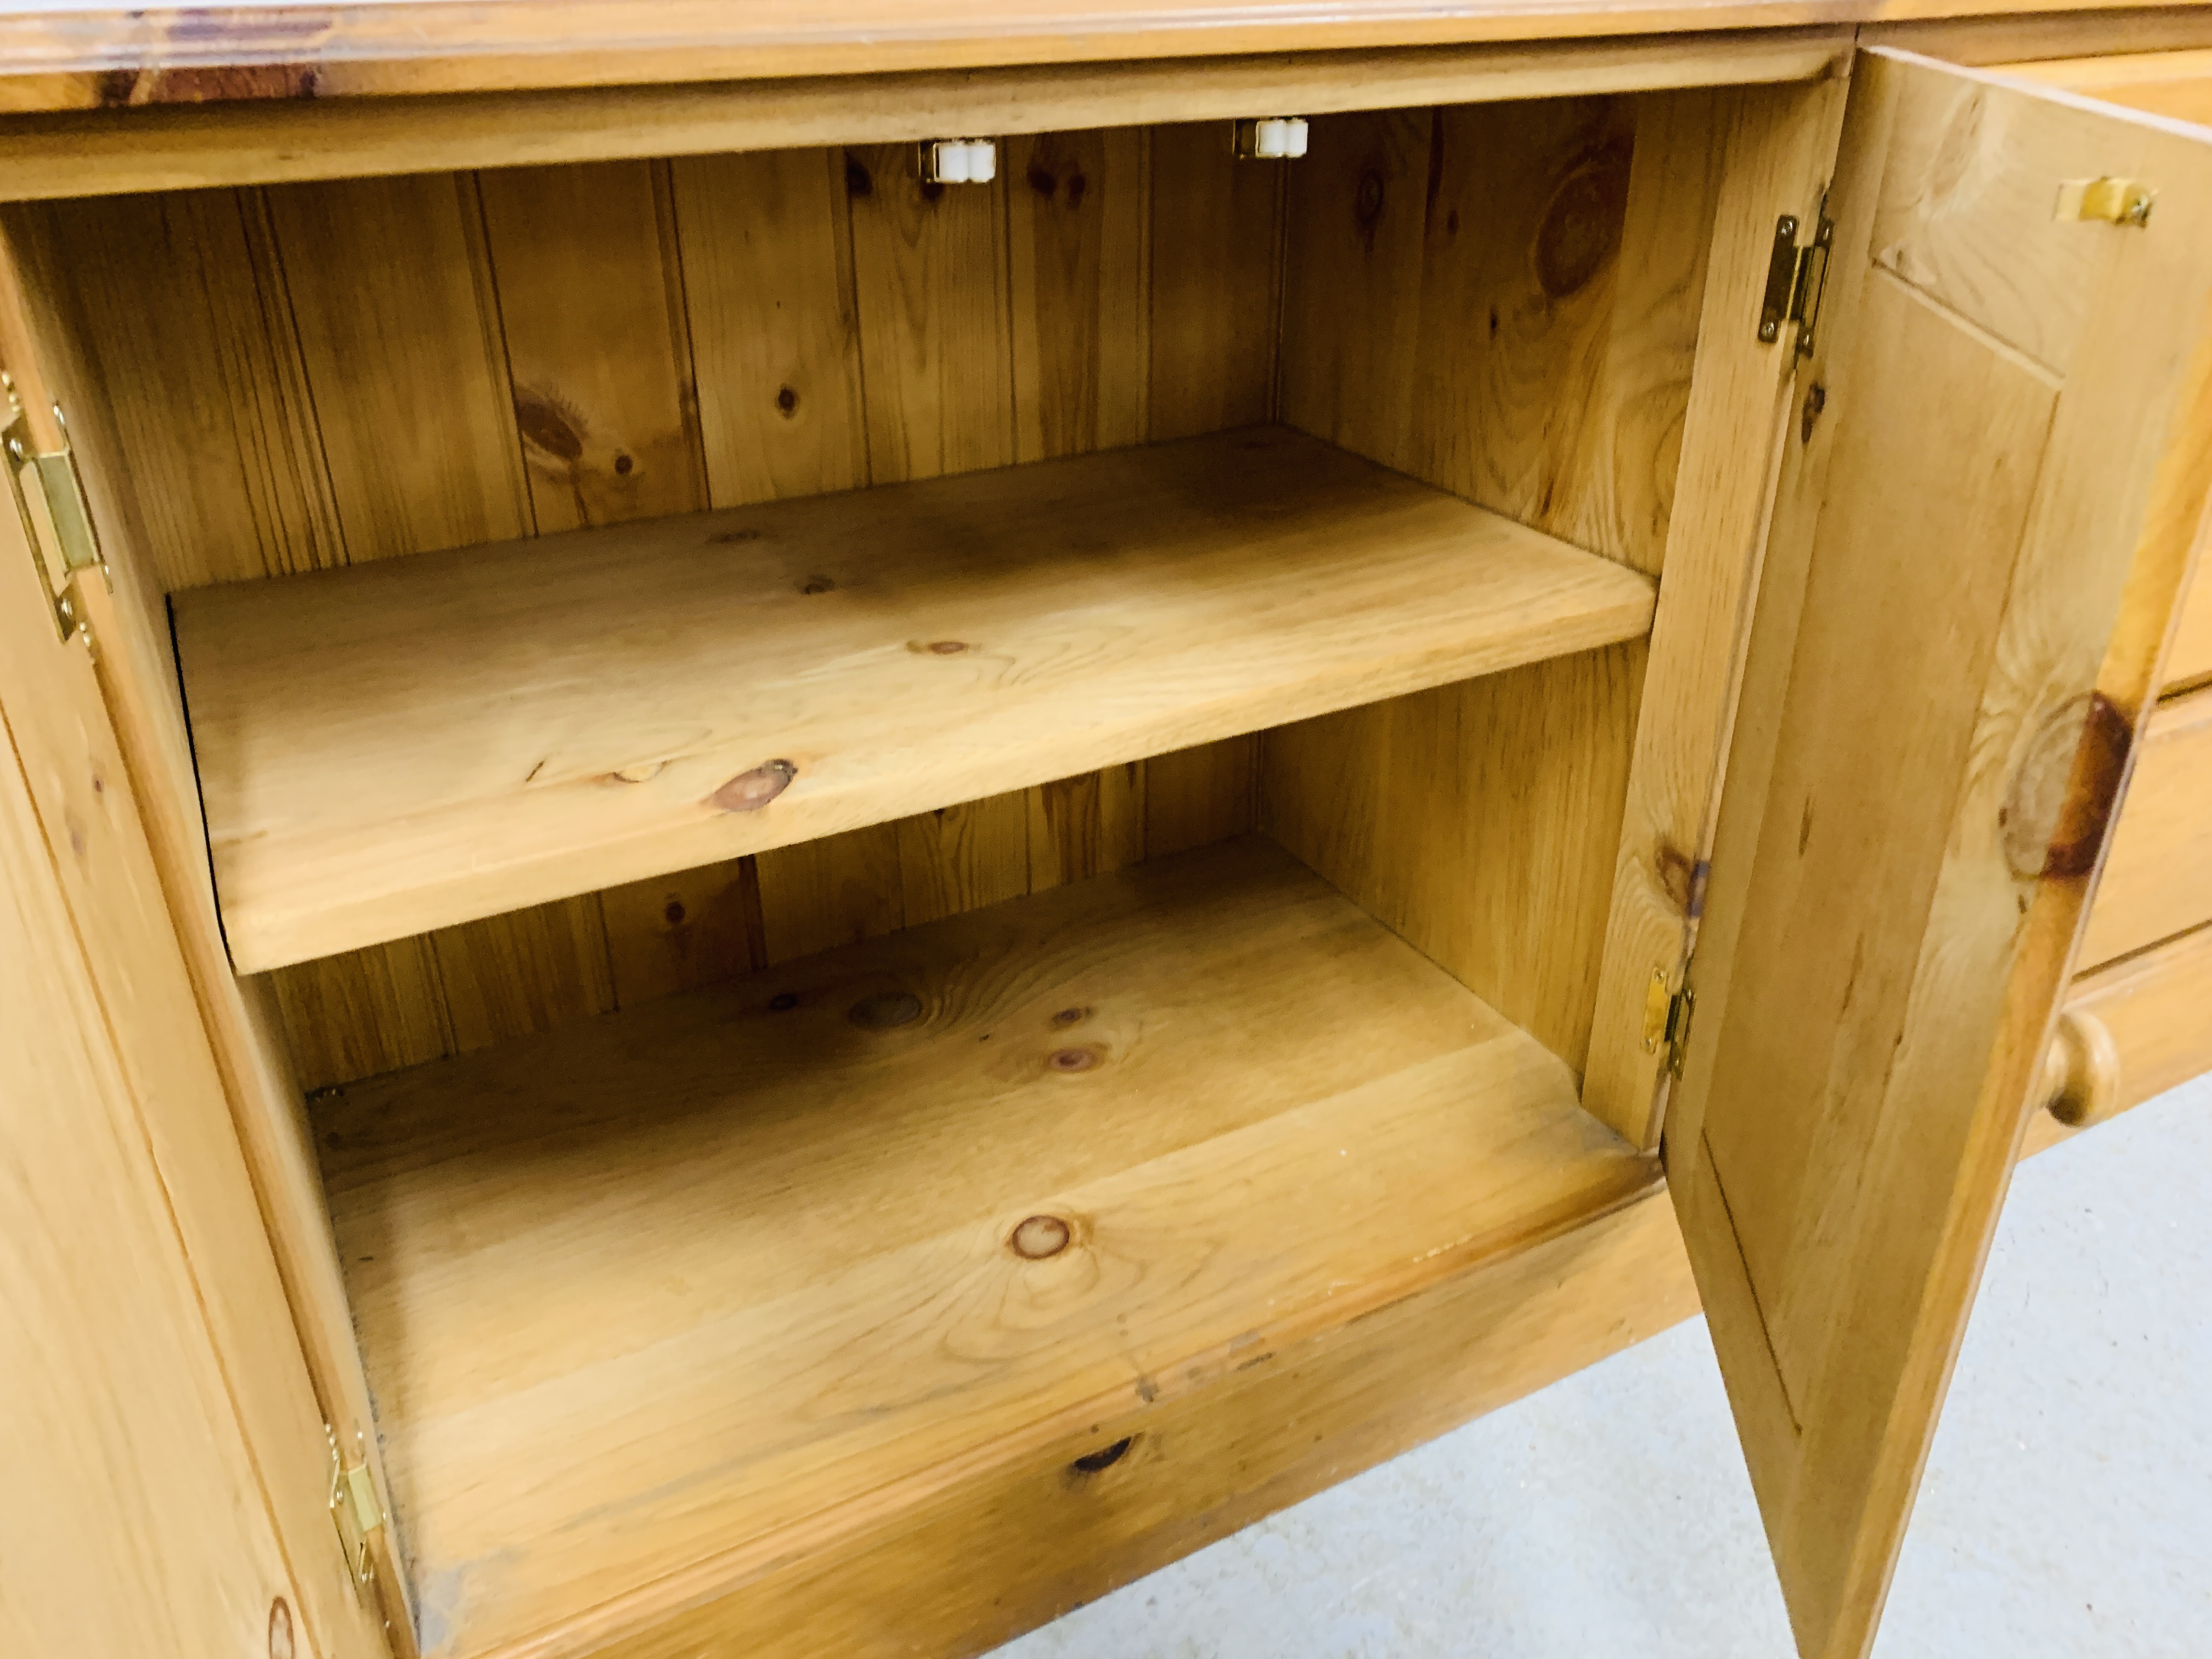 A SOLID HONEY PINE THREE DRAWER DRESSER BASE WITH CABINET TO ONE END - W 130CM. D 41CM. H 66CM. - Image 8 of 9